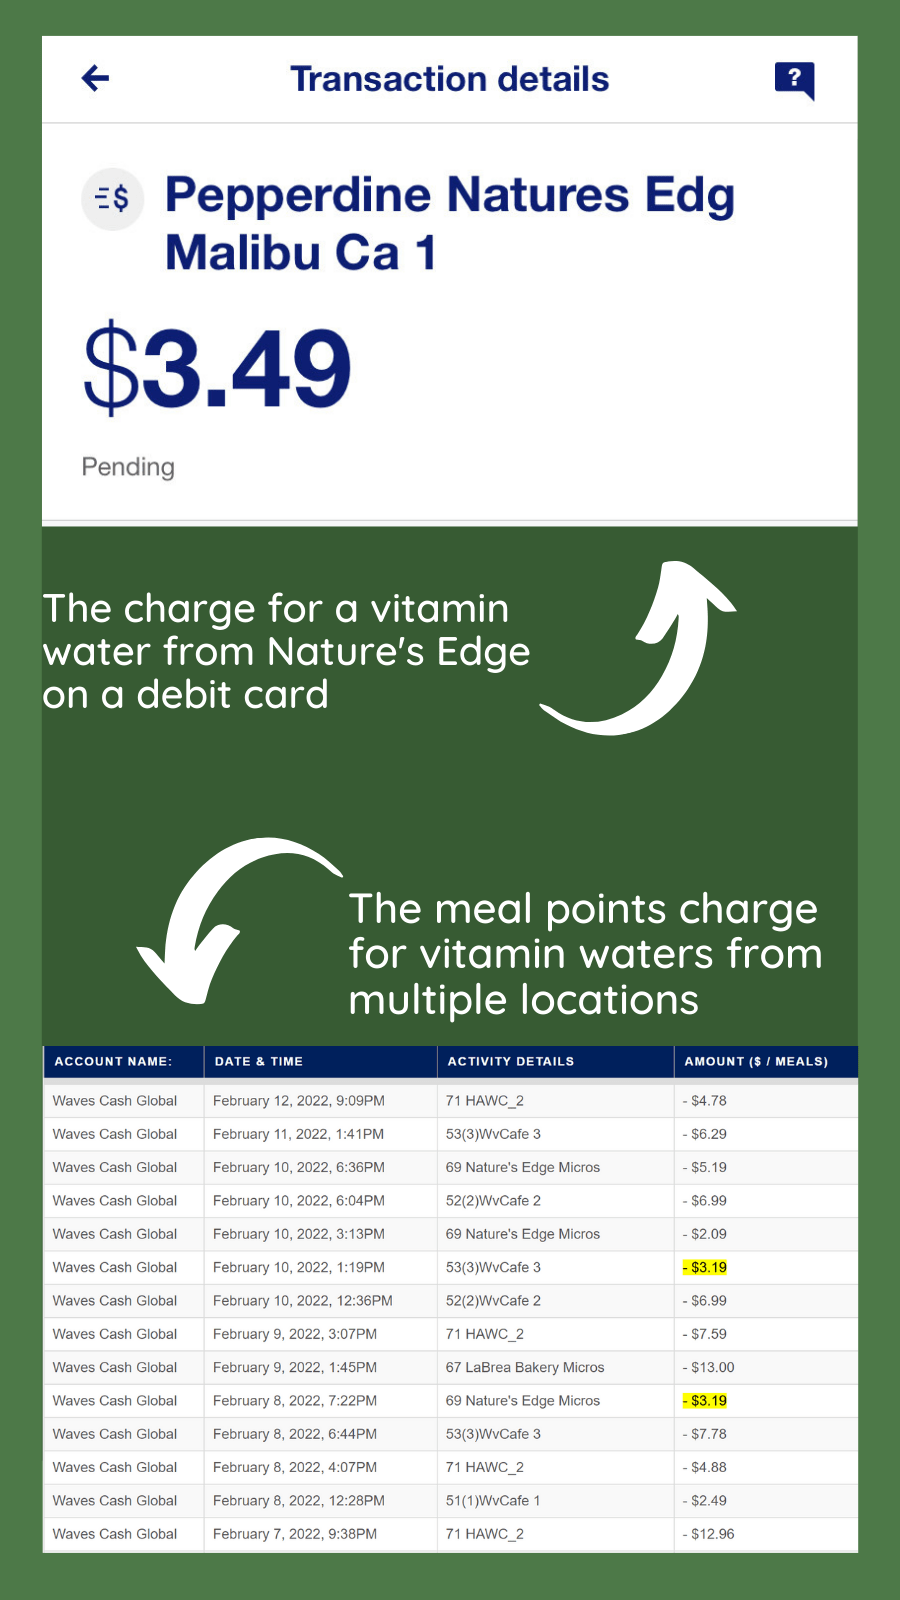 The charges for a vitaminwater differ depending on payment method at Pepperdine dining locations. Sodexo charges sales tax on debit, credit and cash purchases. Graphic by Kyle McCabe